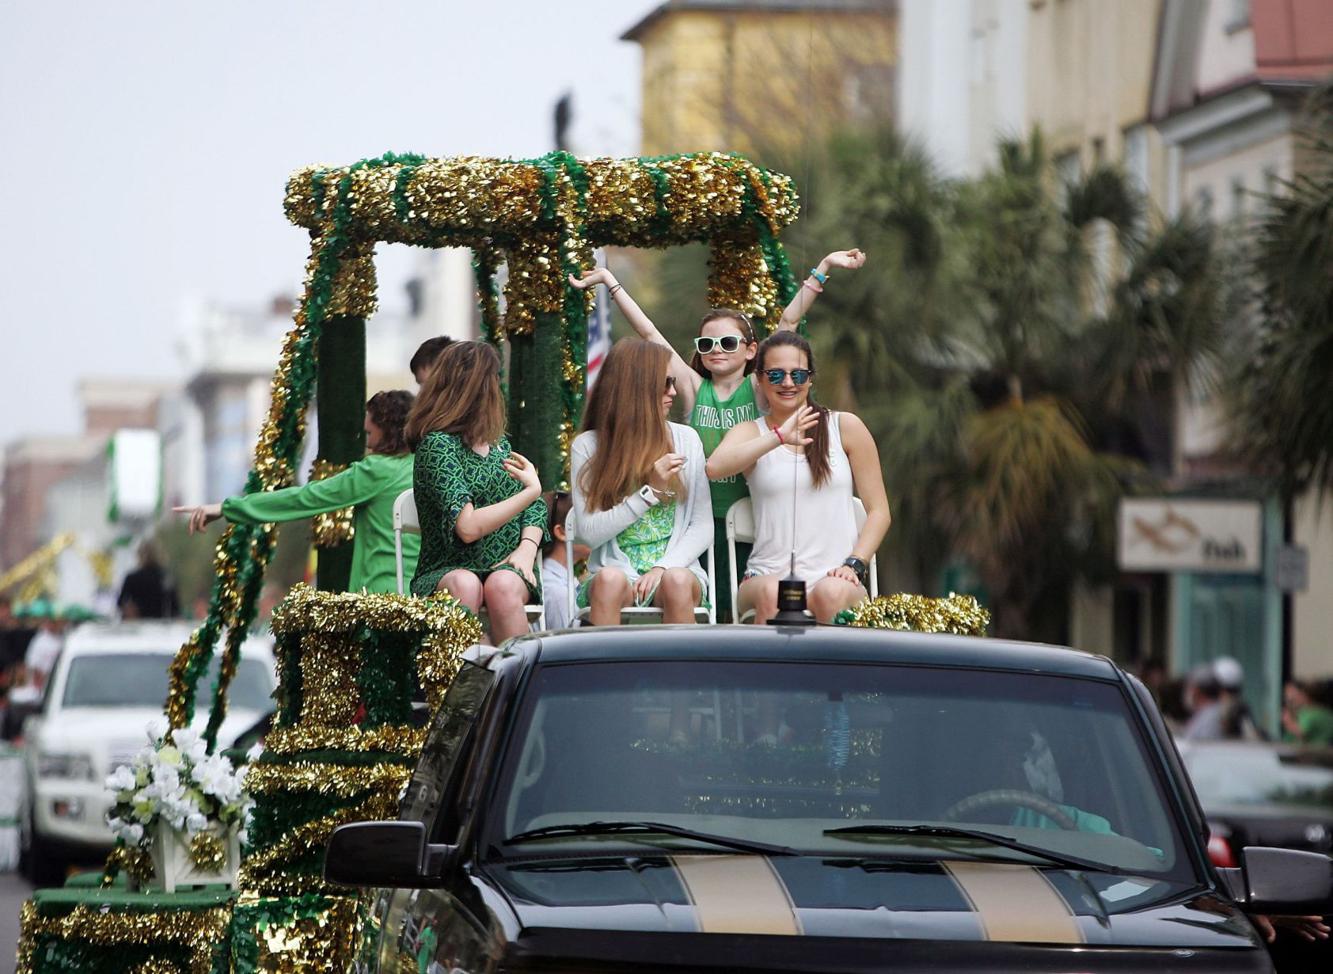 City of Charleston’s St. Patrick’s Day Parade is a nofly zone for